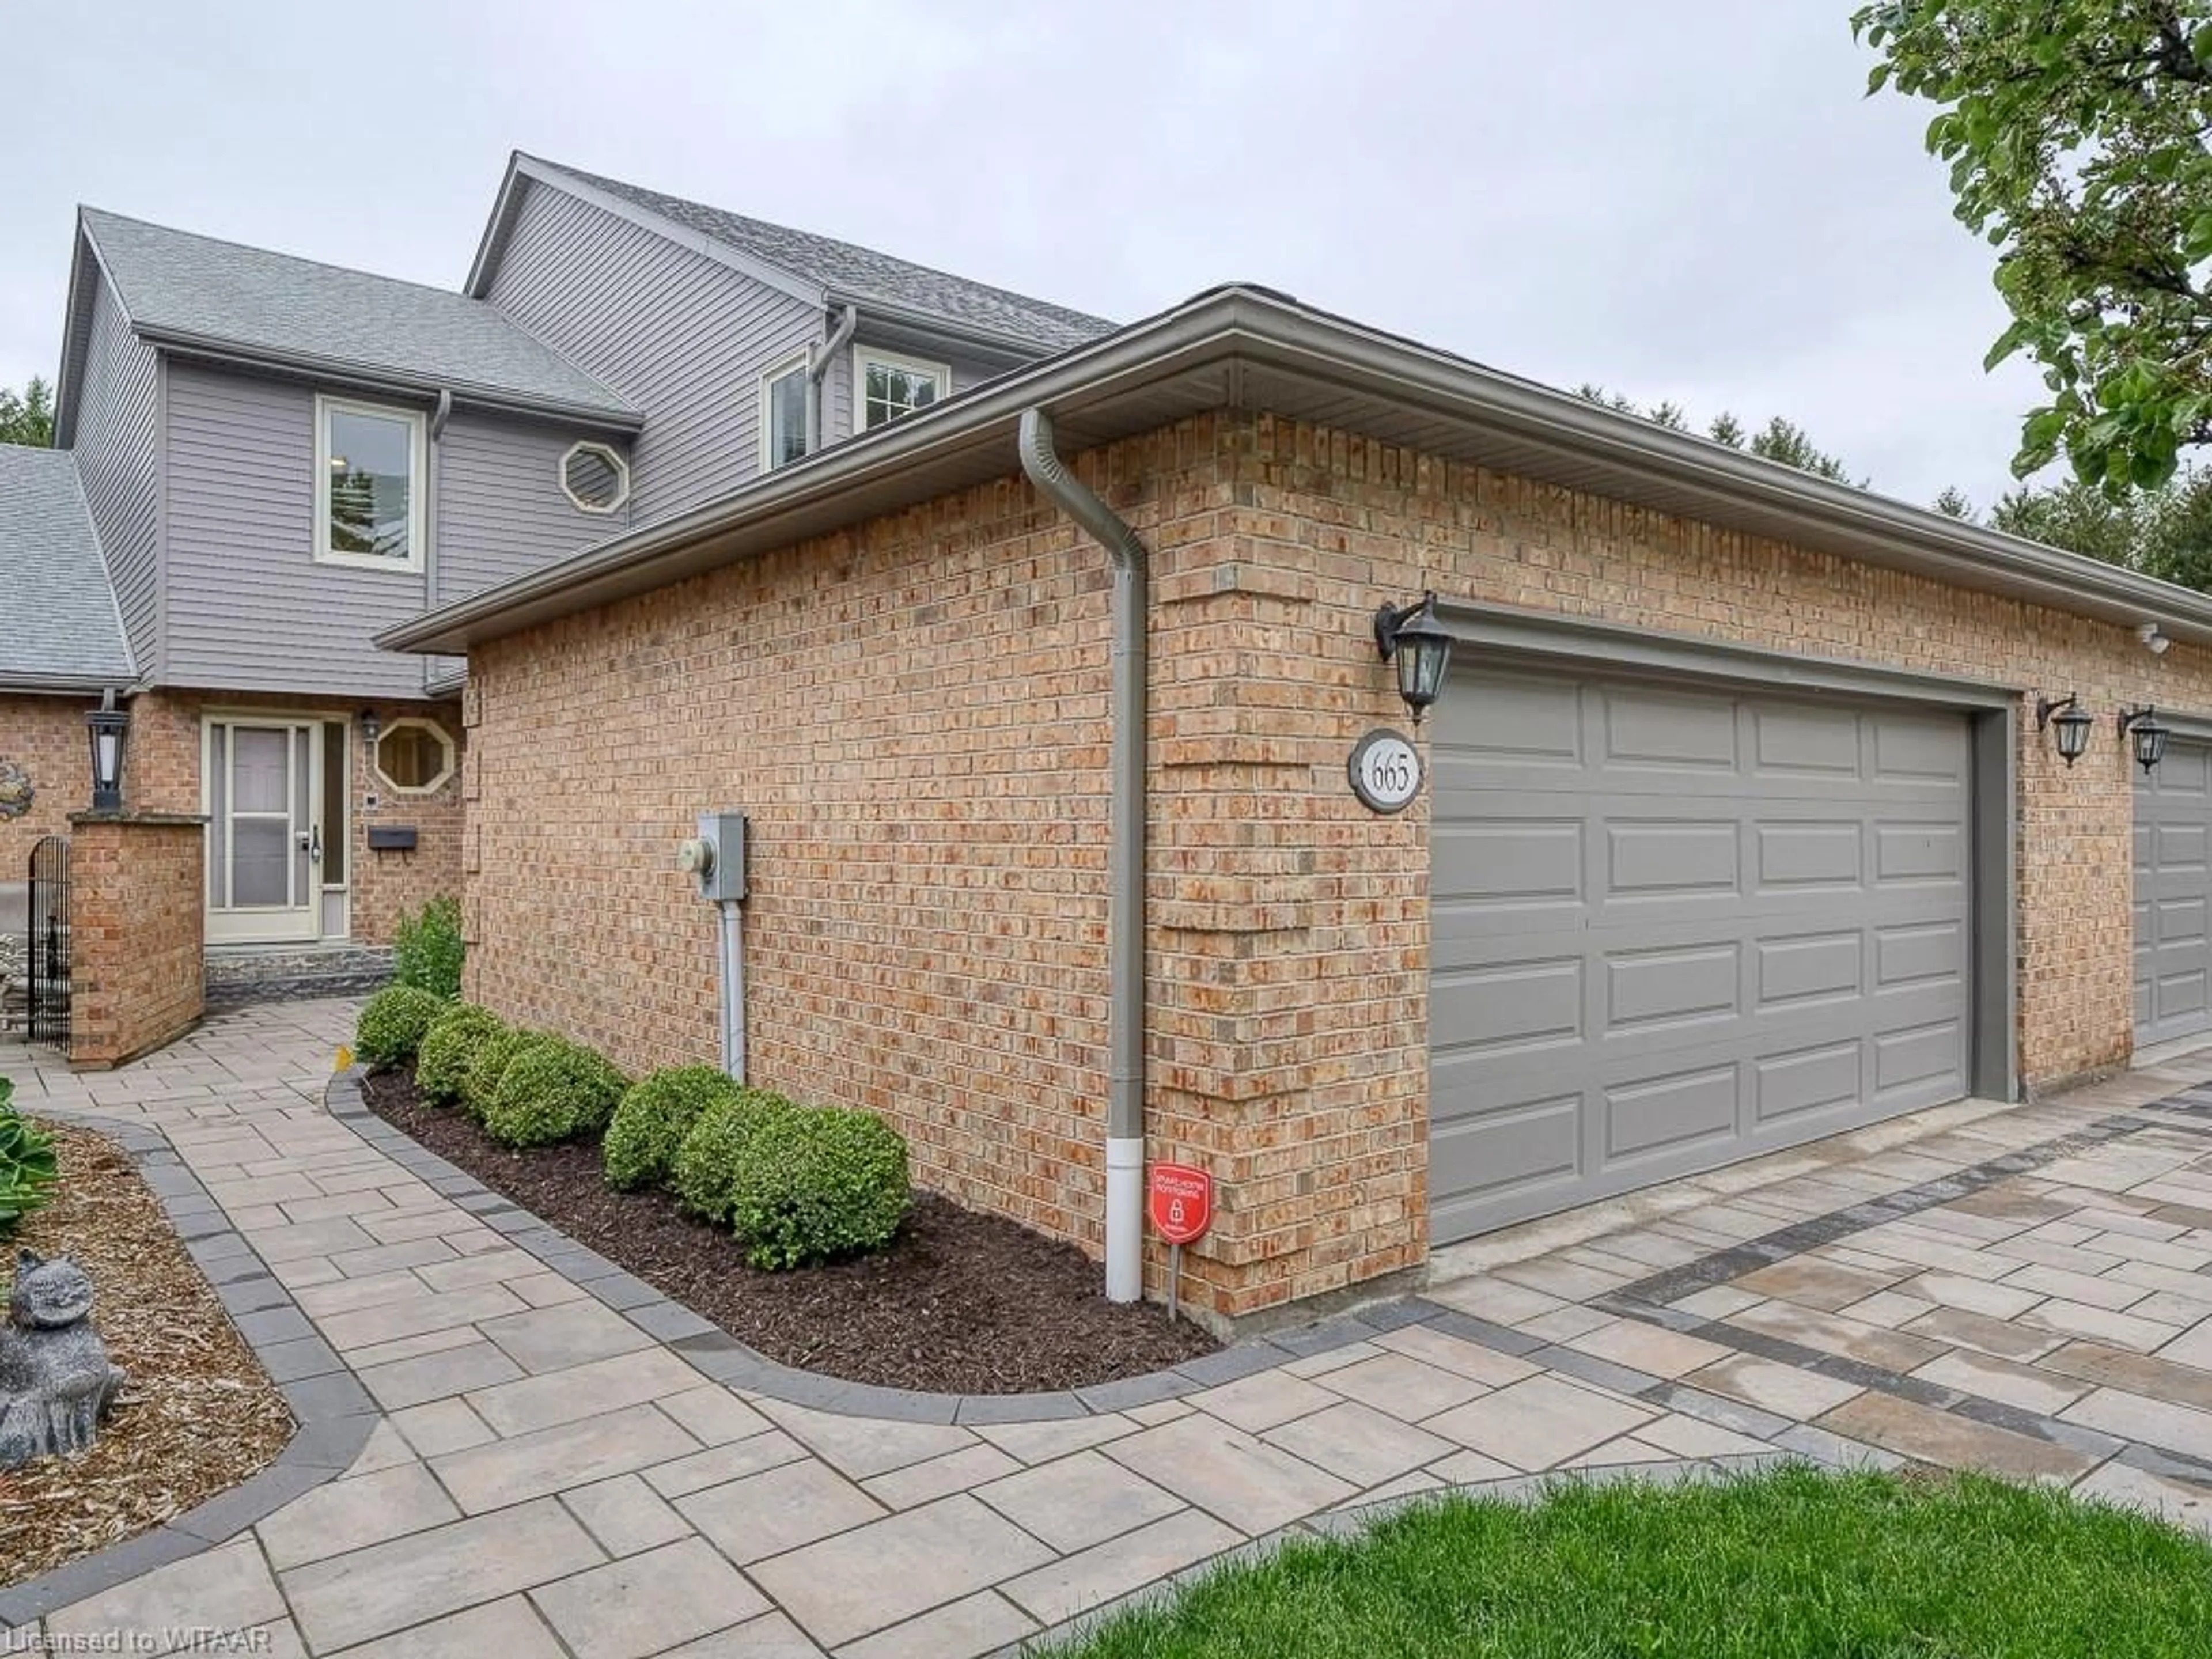 Home with brick exterior material for 665 Lansdowne Ave, Woodstock Ontario N4T 1K3